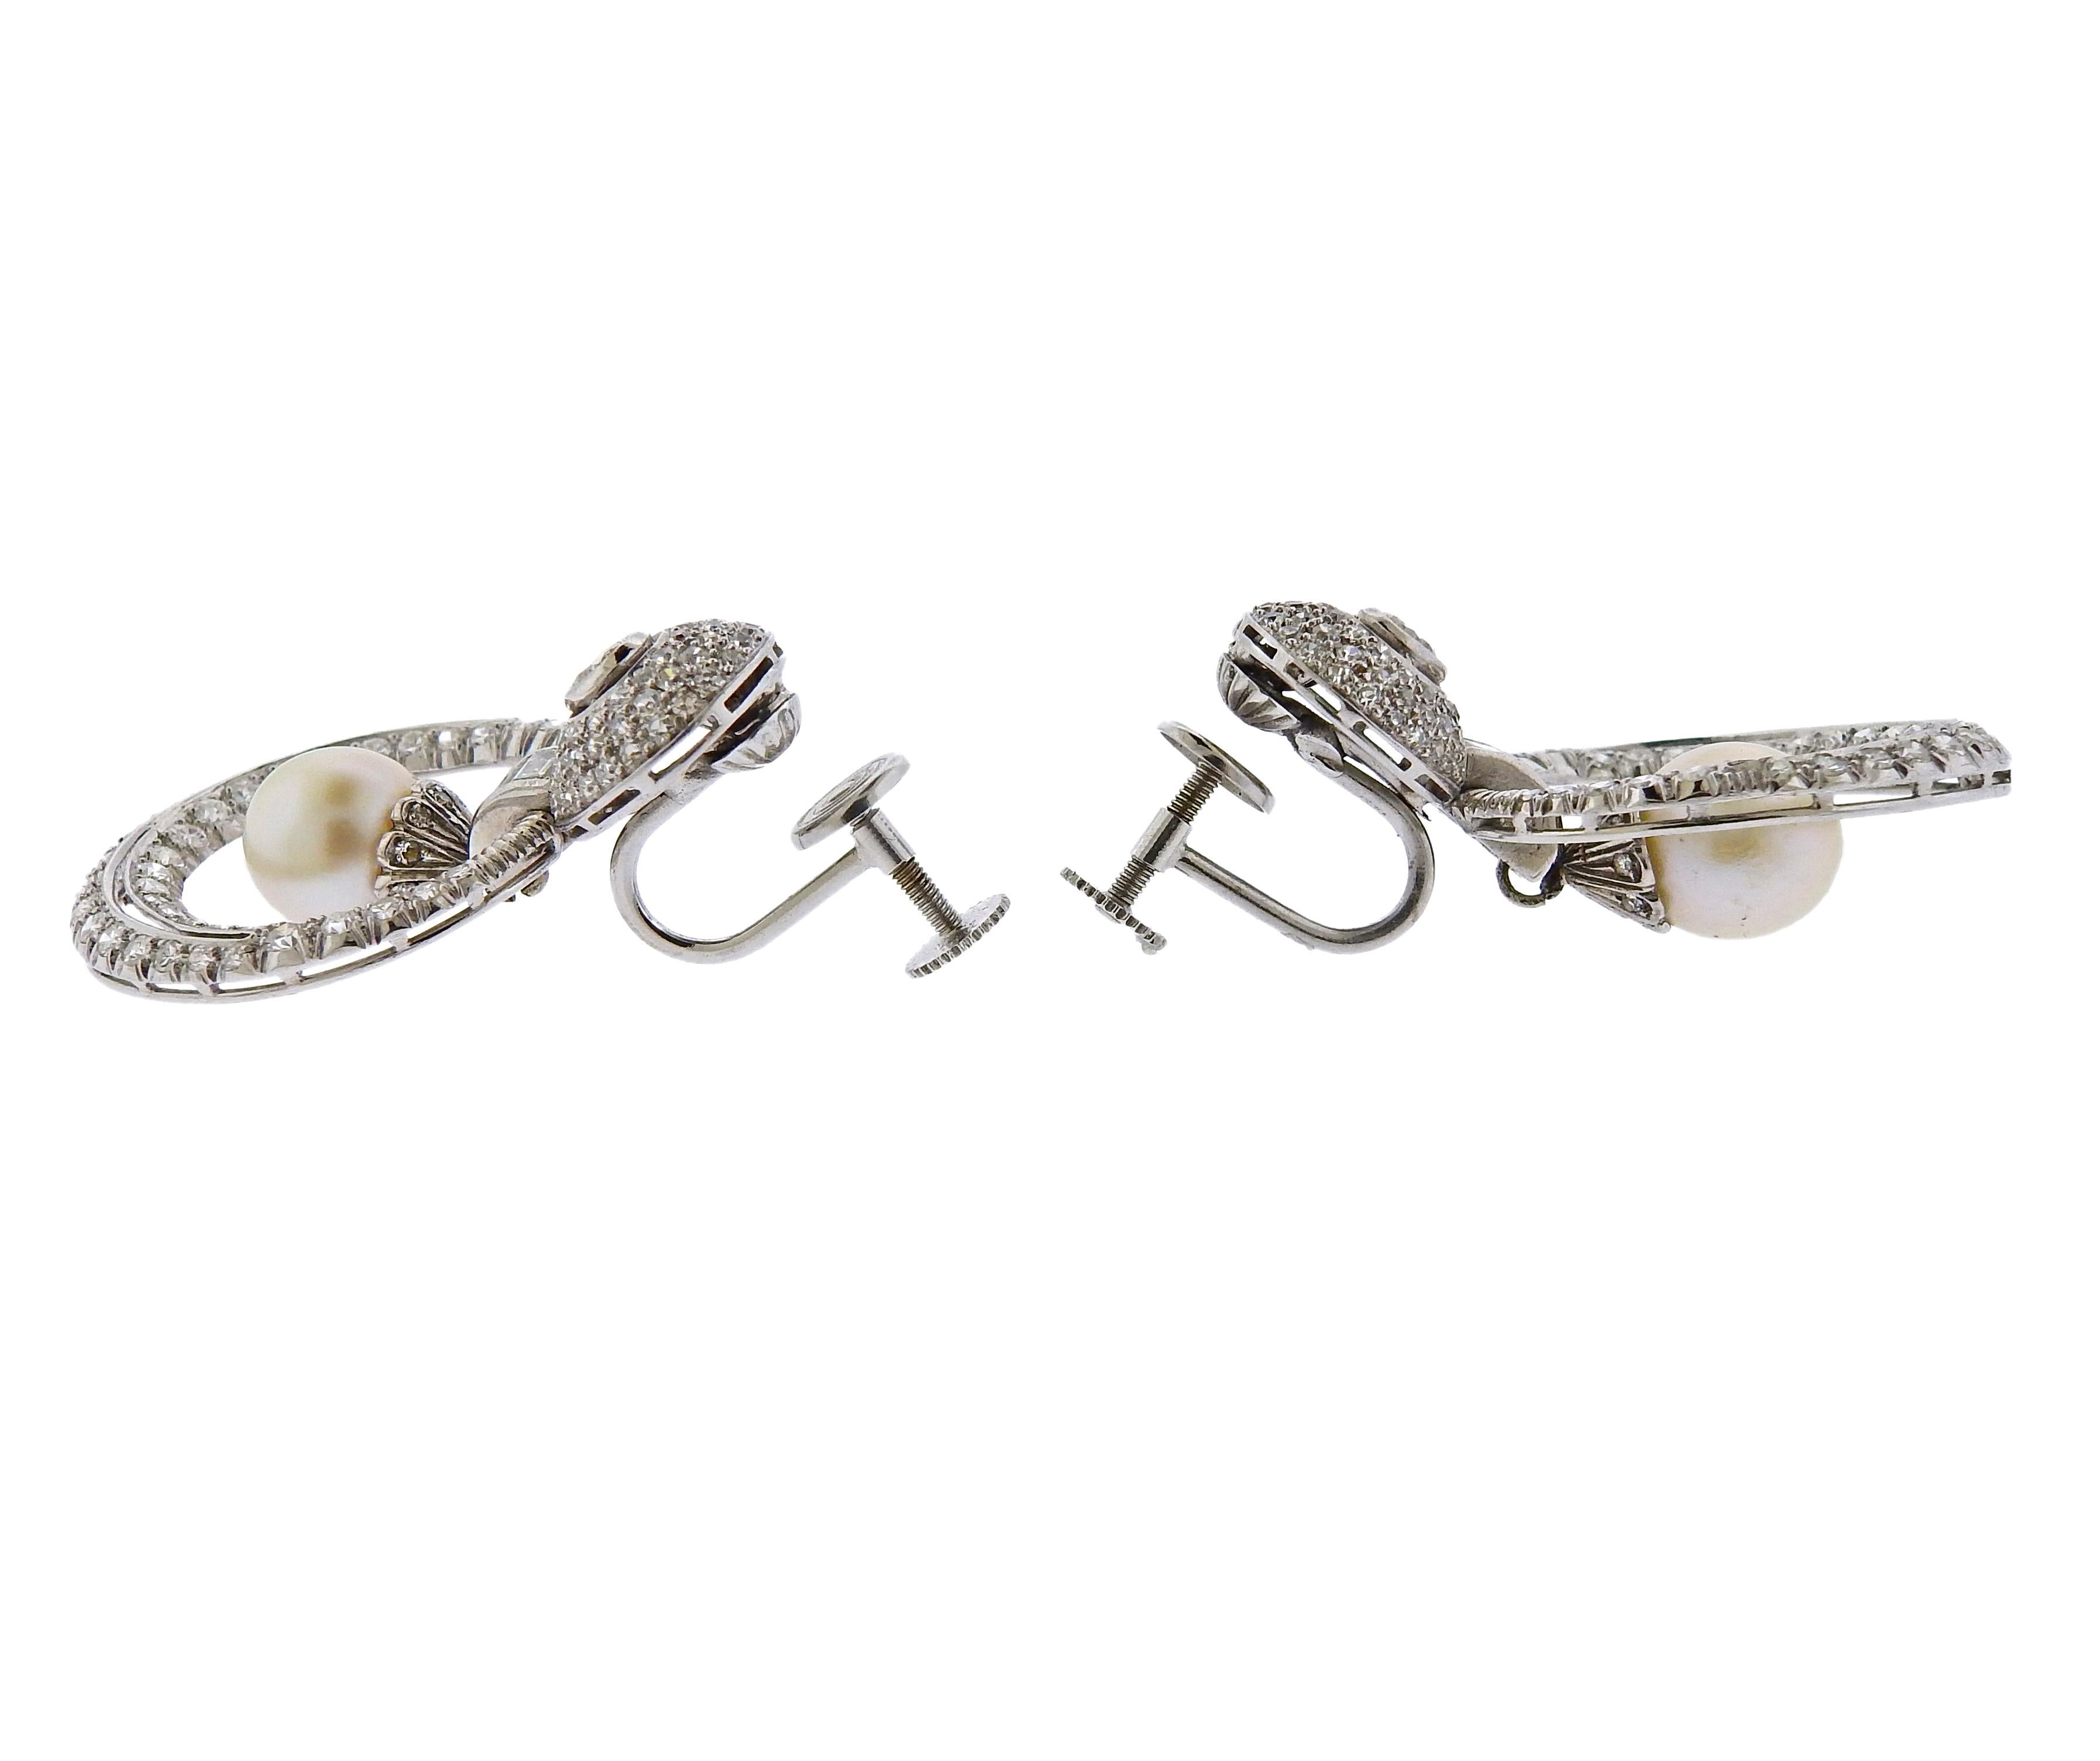 Pair of platinum doorknocker earrings, set with 9mm pearls and approx. 4.00ctw in diamonds. The back hardware is marked 14k, earrings tested platinum. The earrings measure 38mm x 25mm. Weigh 17.7 grams.

SKU#E-02036